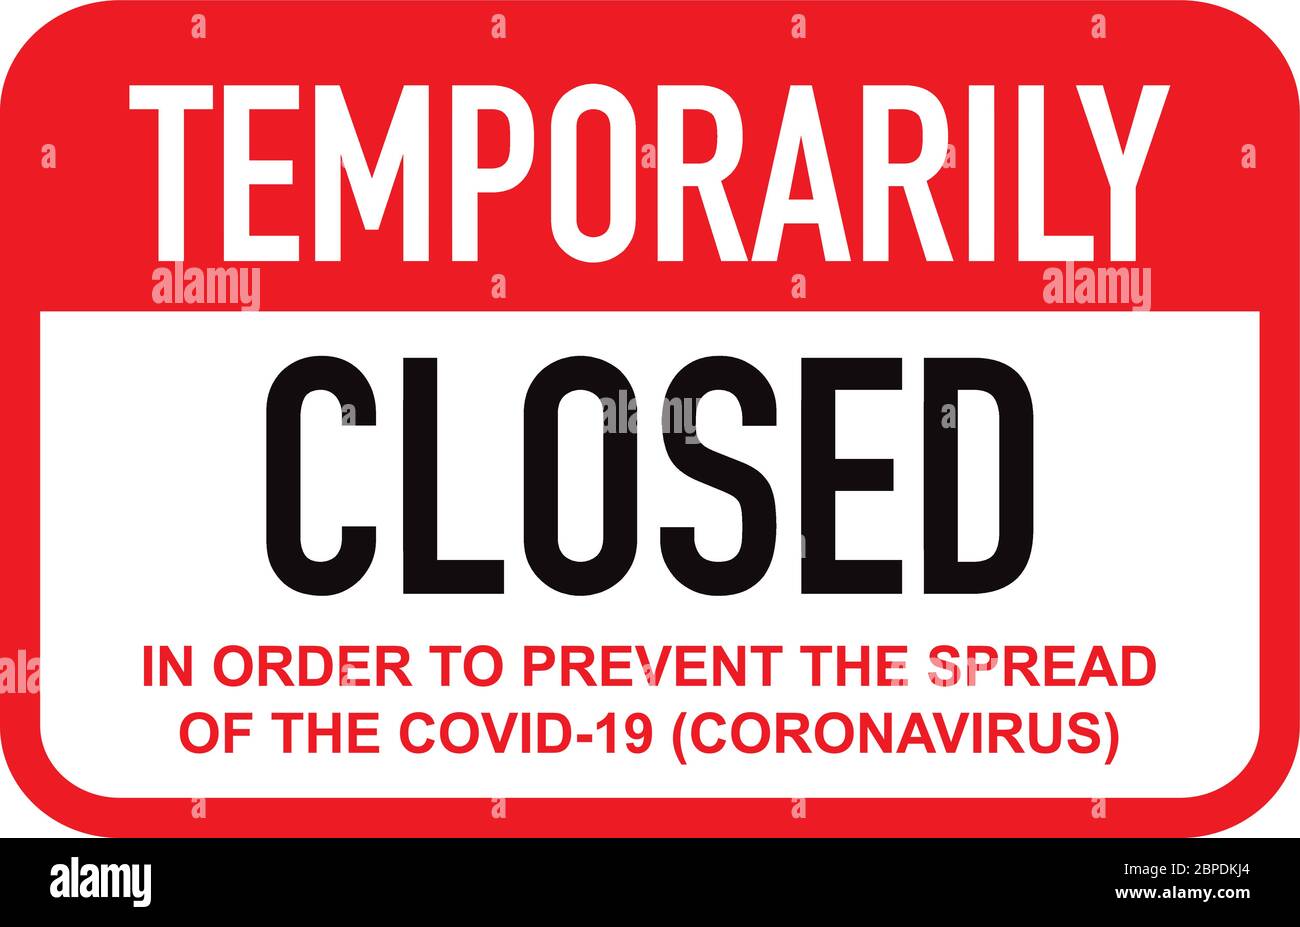 Office temporarily closed sign of coronavirus news. Information warning sign about quarantine measures in public places. Restriction and caution COVID Stock Vector